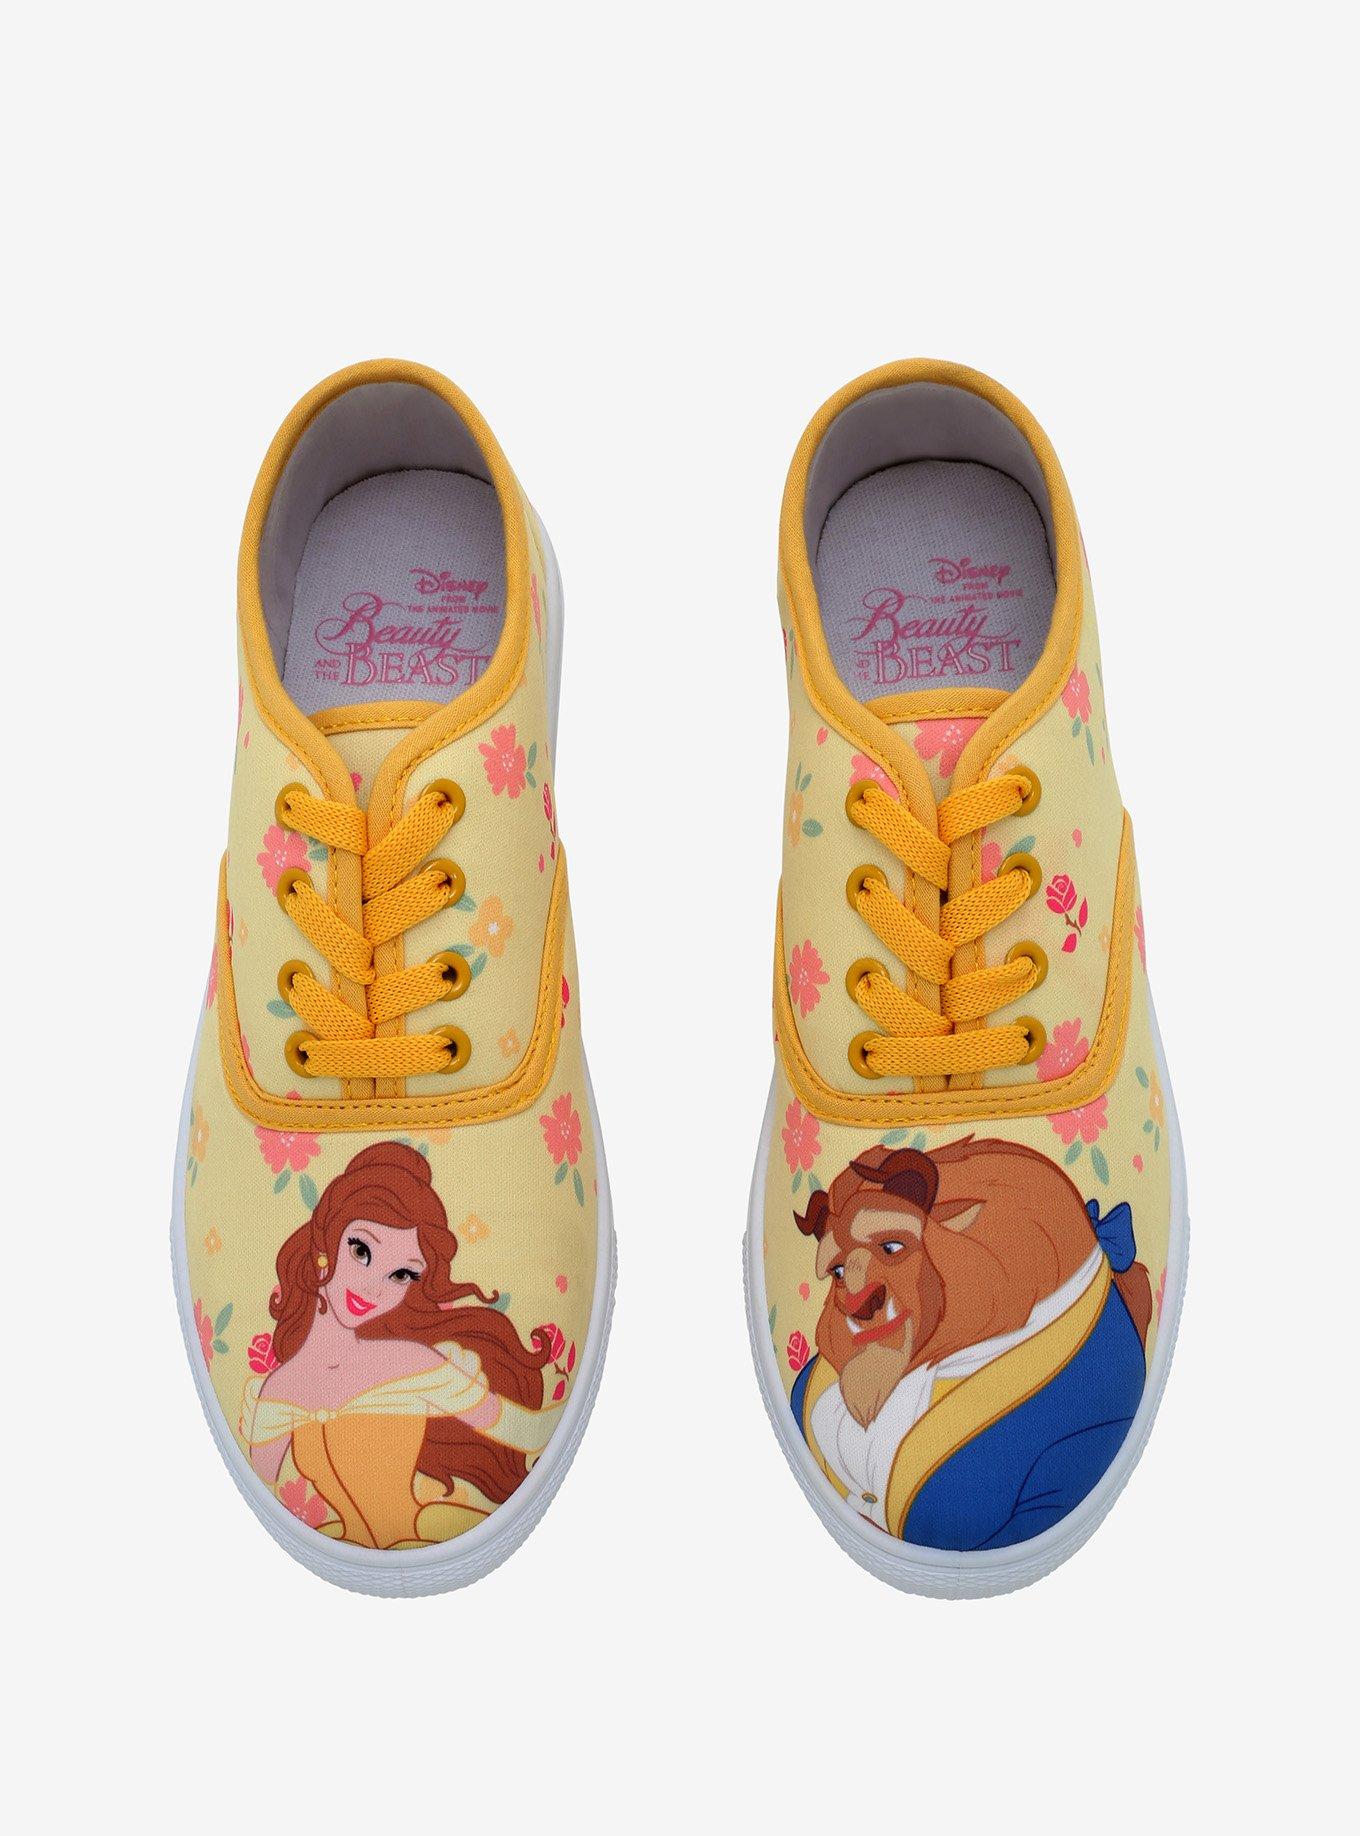 Disney Beauty And The Beast Belle & Beast Floral Lace-Up Sneakers, MULTI, hi-res